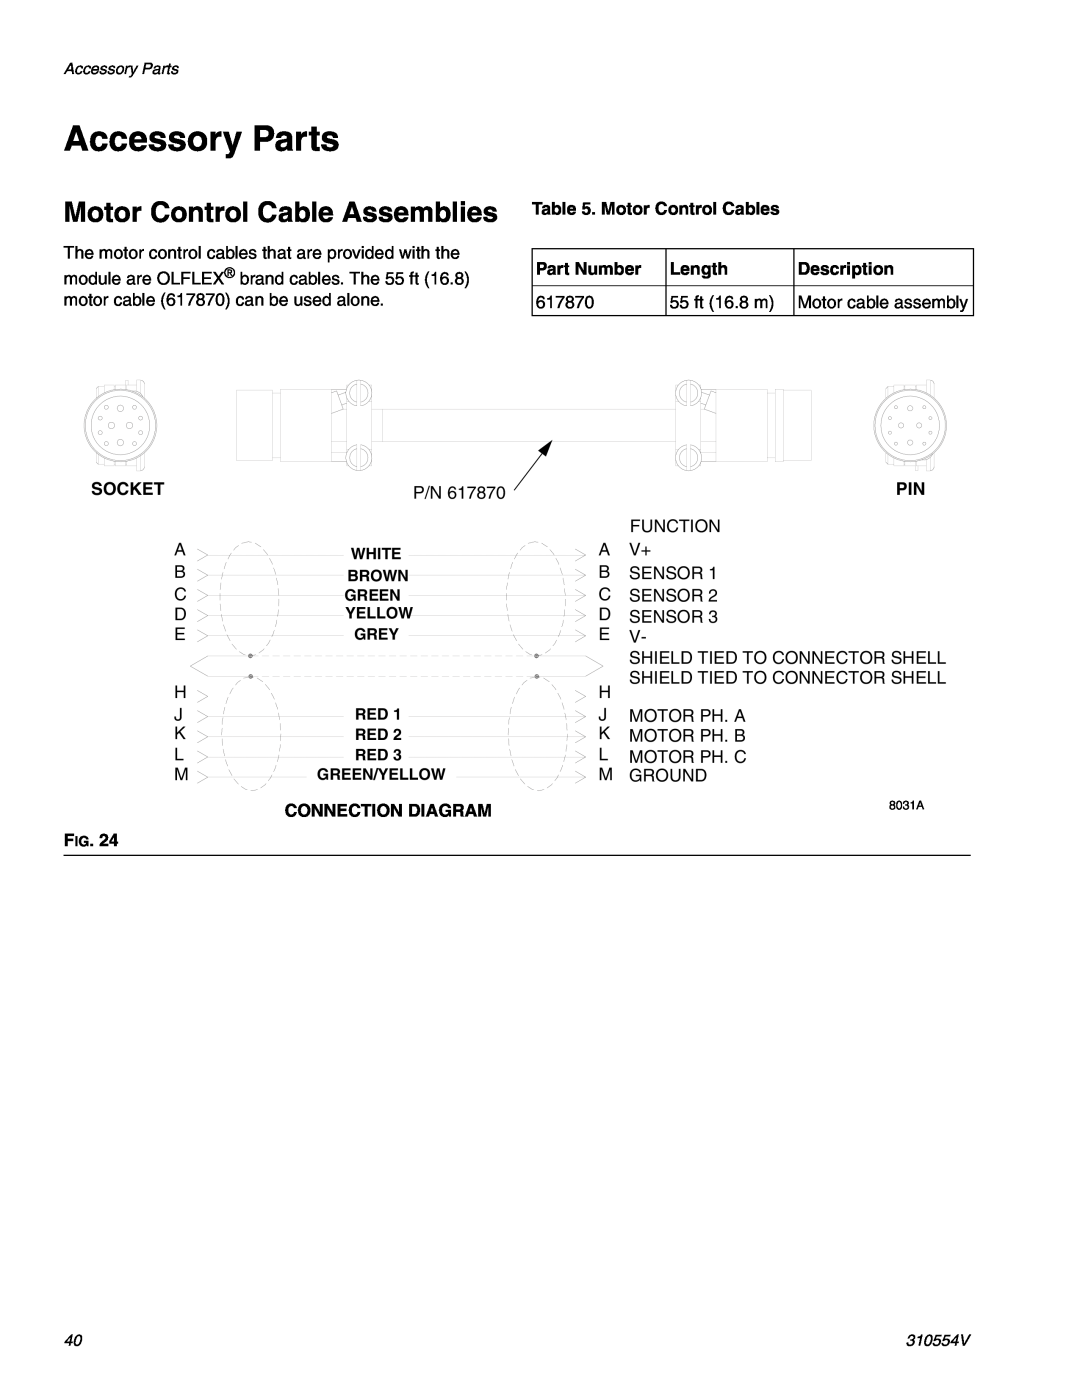 Graco 310554V important safety instructions Accessory Parts, Motor Control Cable Assemblies 